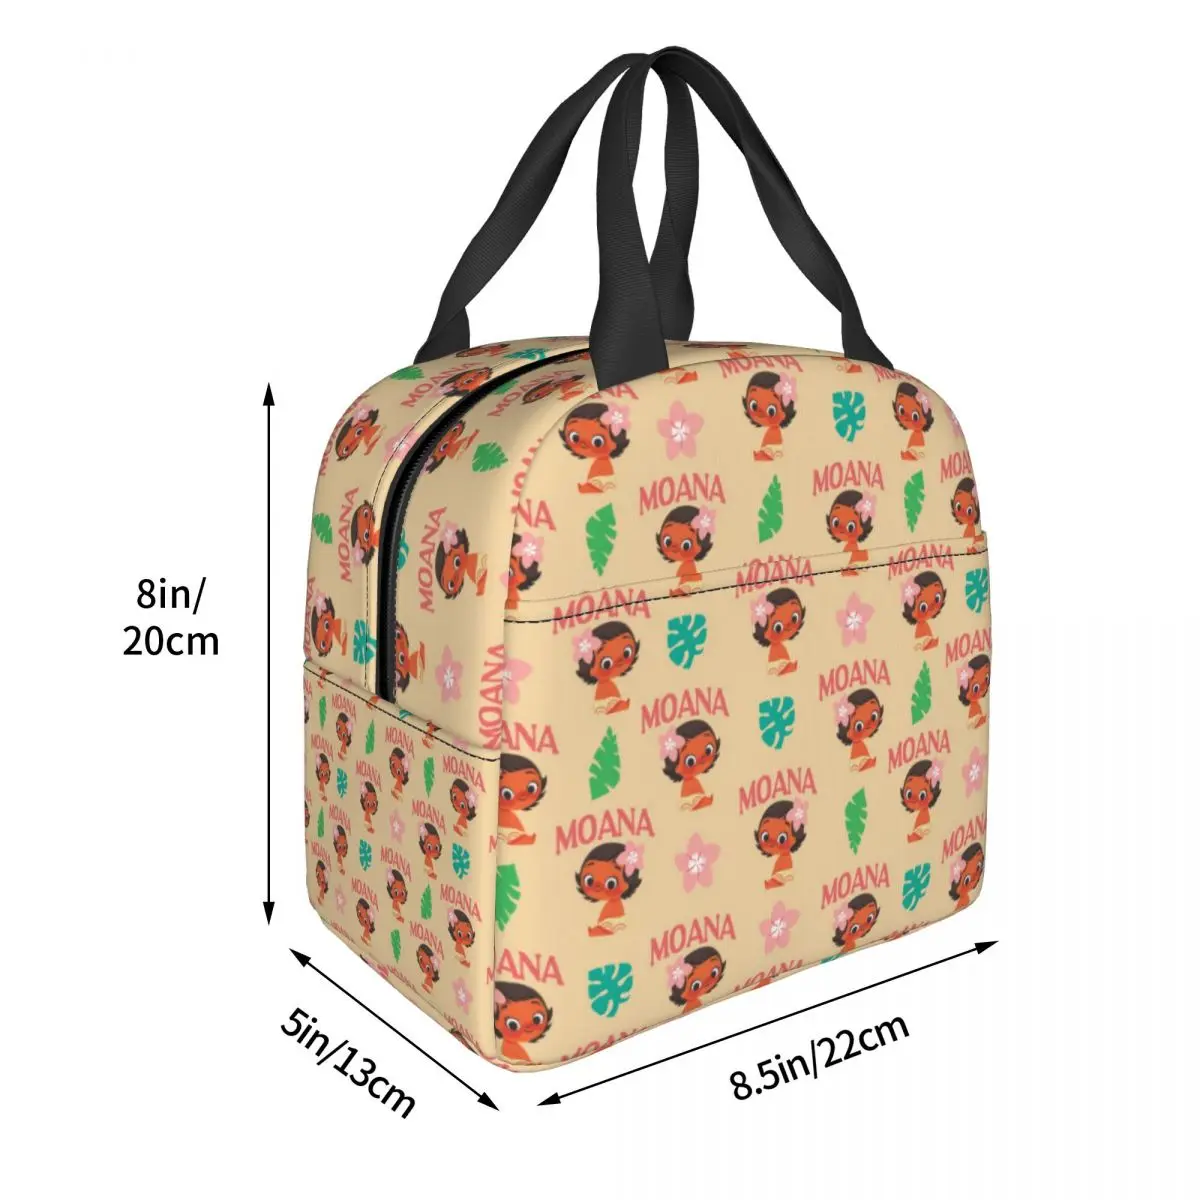 https://ae01.alicdn.com/kf/S2cd4c373ab744aeeb9396e70b383045bb/Disney-Cream-Moana-Toddler-Insulated-Lunch-Bag-Cooler-Bag-Meal-Container-Leakproof-Tote-Lunch-Box-Bento.jpg